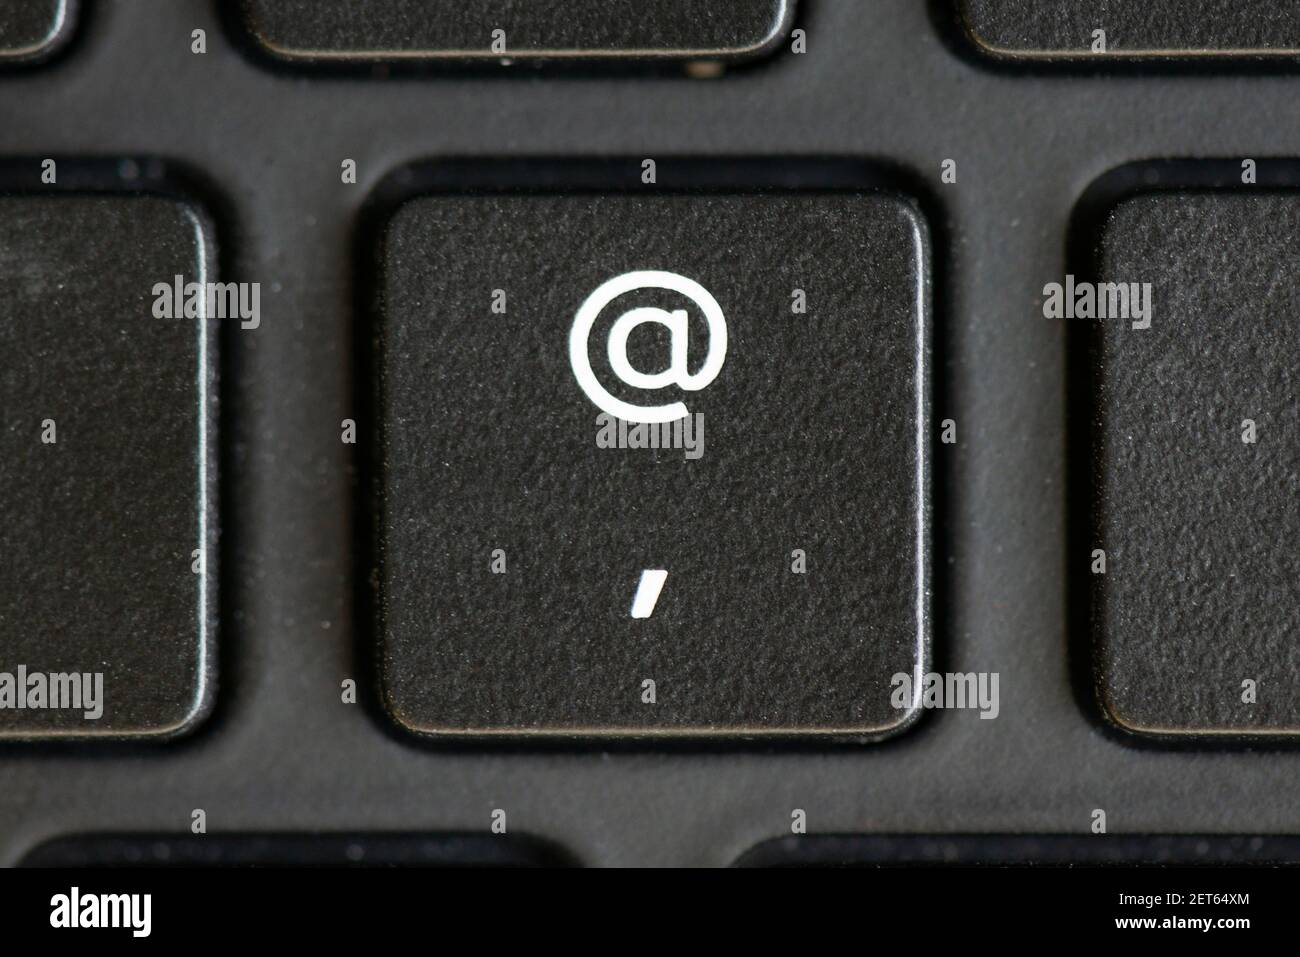 Apostrophe and at sign key on a laptop keyboard Stock Photo - Alamy